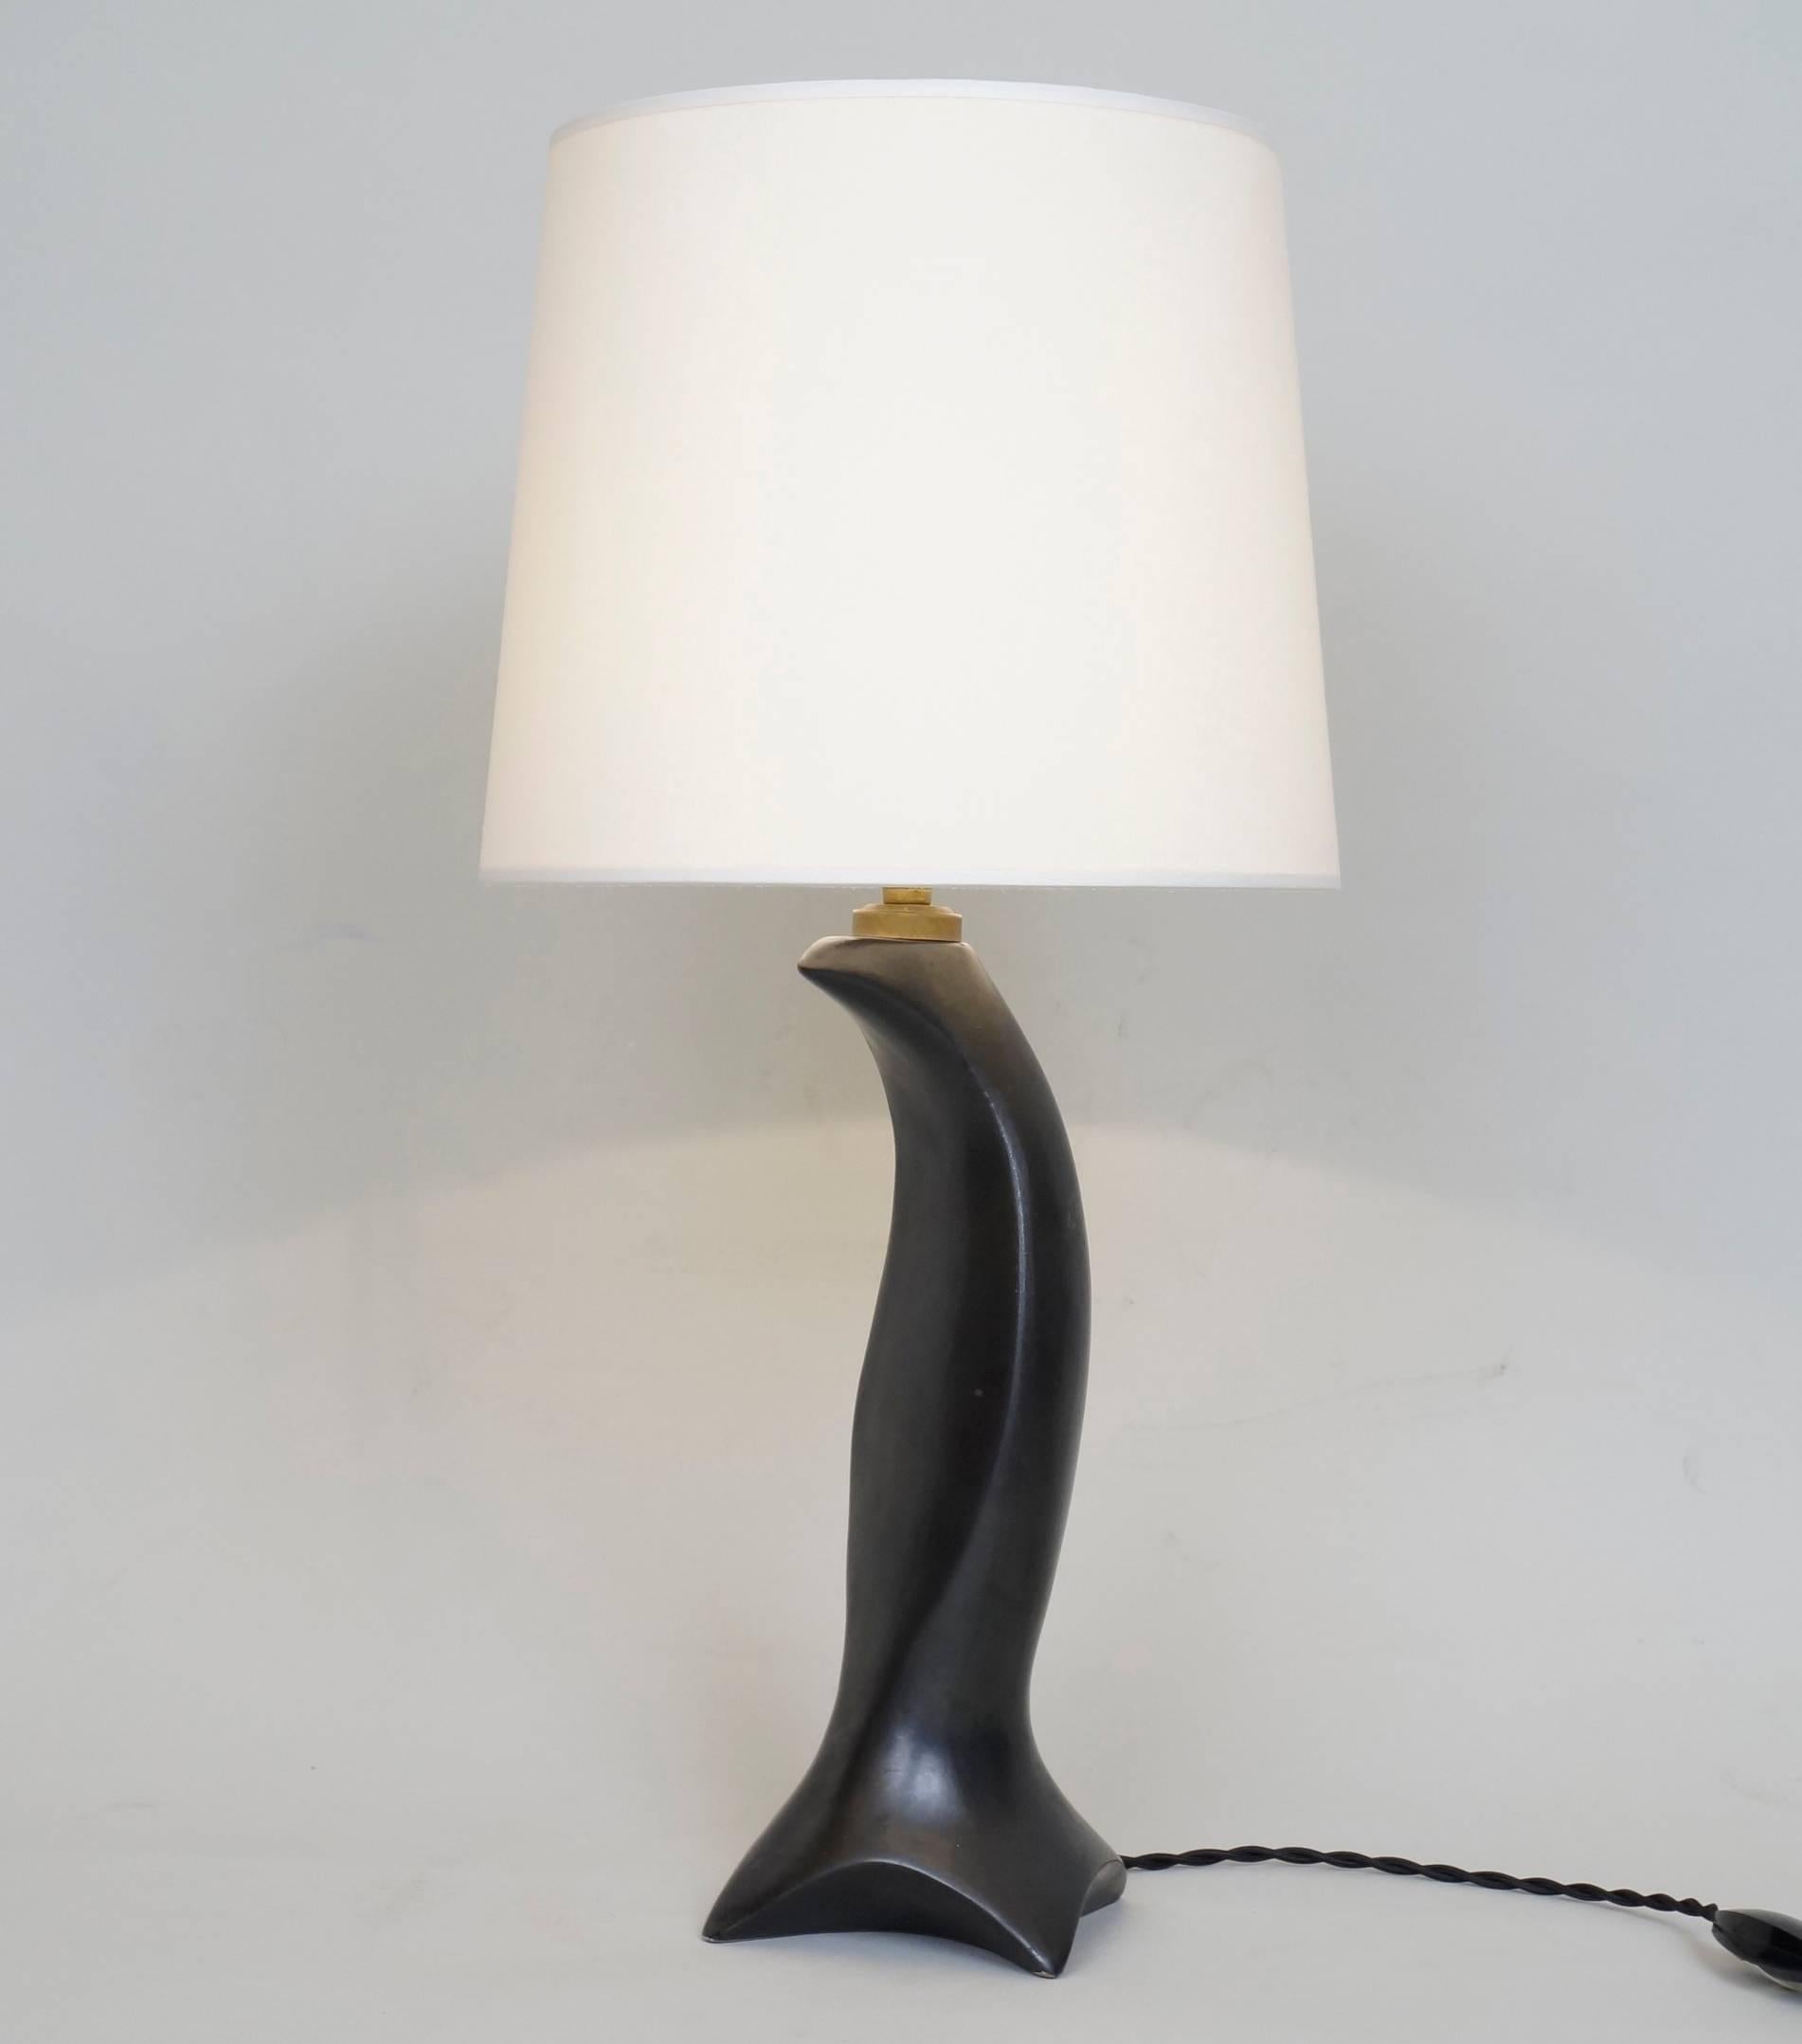 Zoomorphic table lamp in black satin ceramic.
Stamp on the back: Made in France
custom-made lampshade.
Rewired with twisted silk cord. 
US plug on request.
Ceramic height: 28 cm - 11in.
Height with lampshade : 50 cm - 19.7in.



  